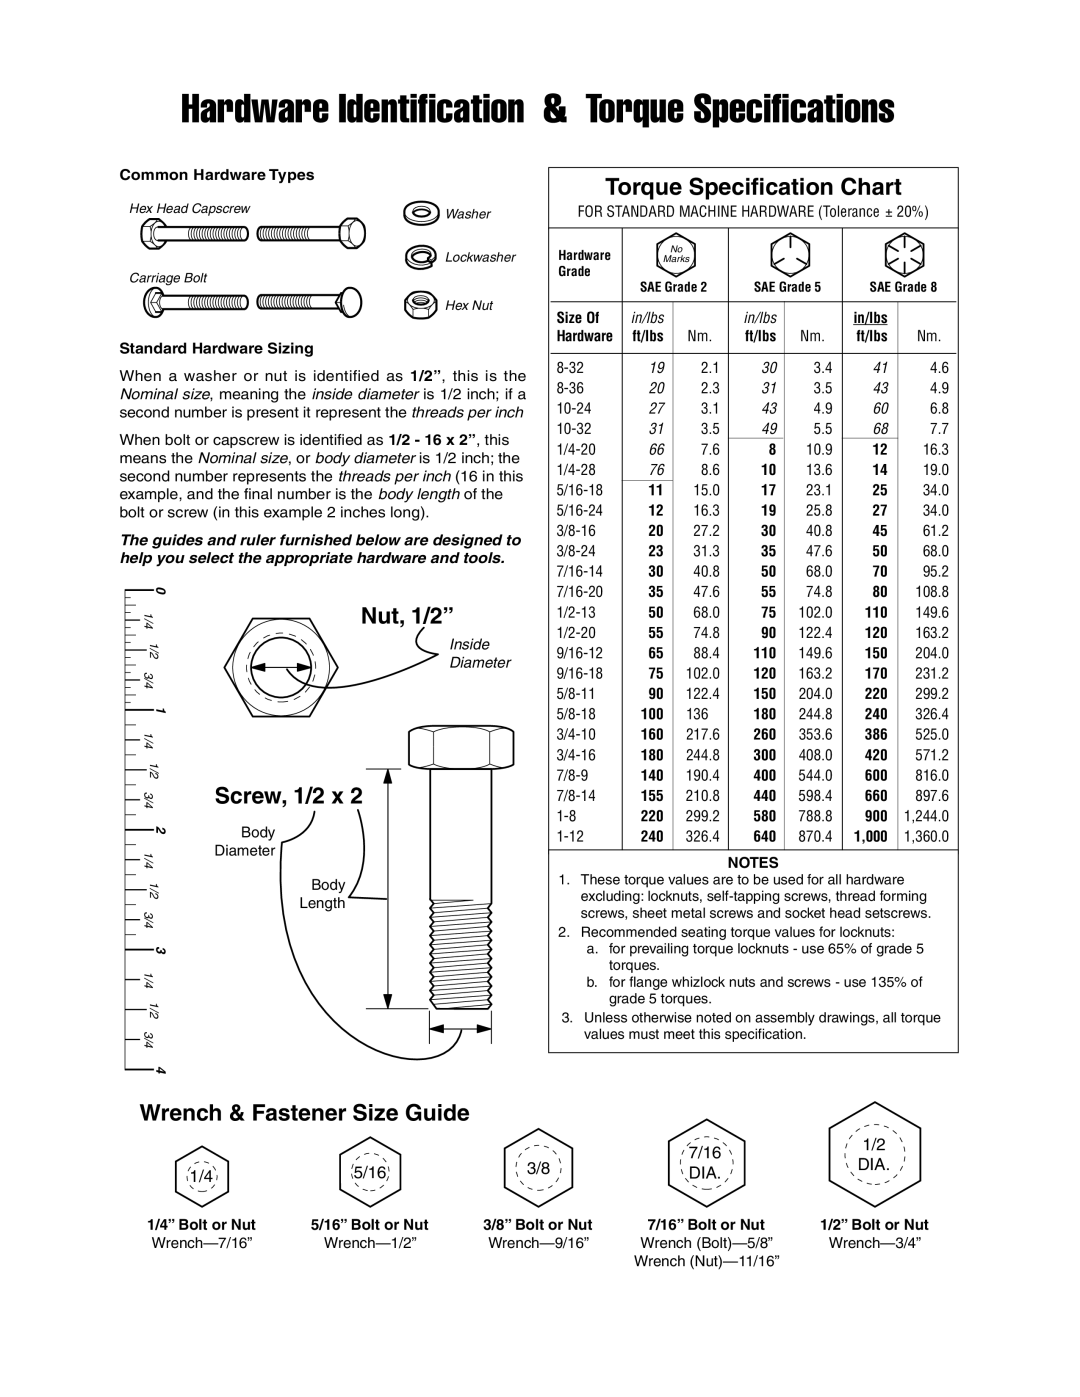 Snapper 4576 Wrench & Fastener Size Guide, Hardware Identification & Torque Specifications, Torque Specification Chart 